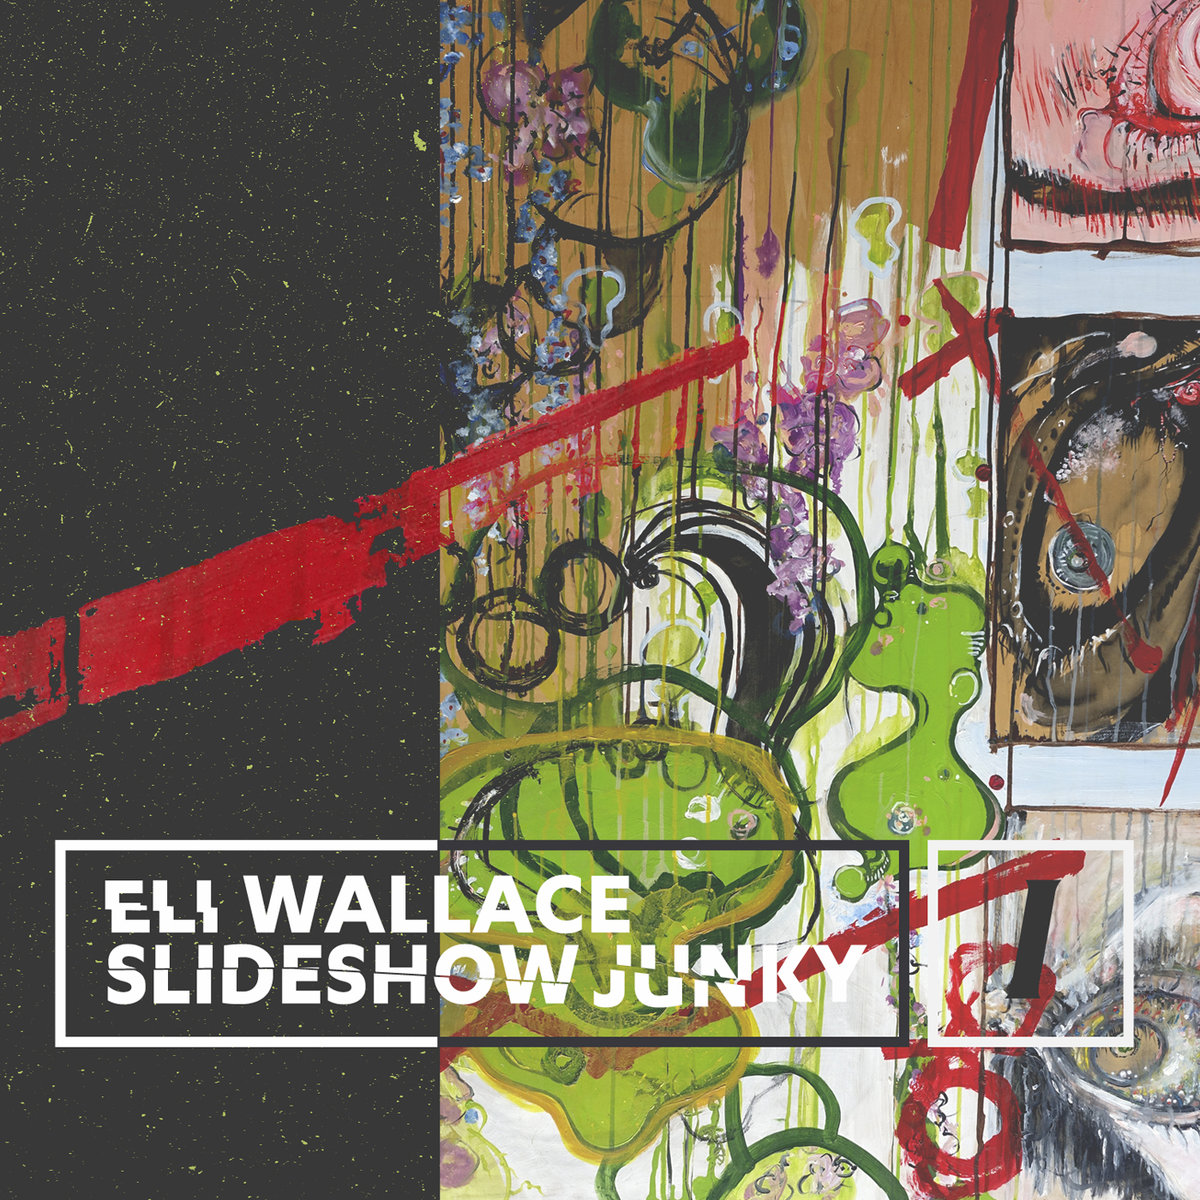 Slideshow Junky I by Eli Wallace